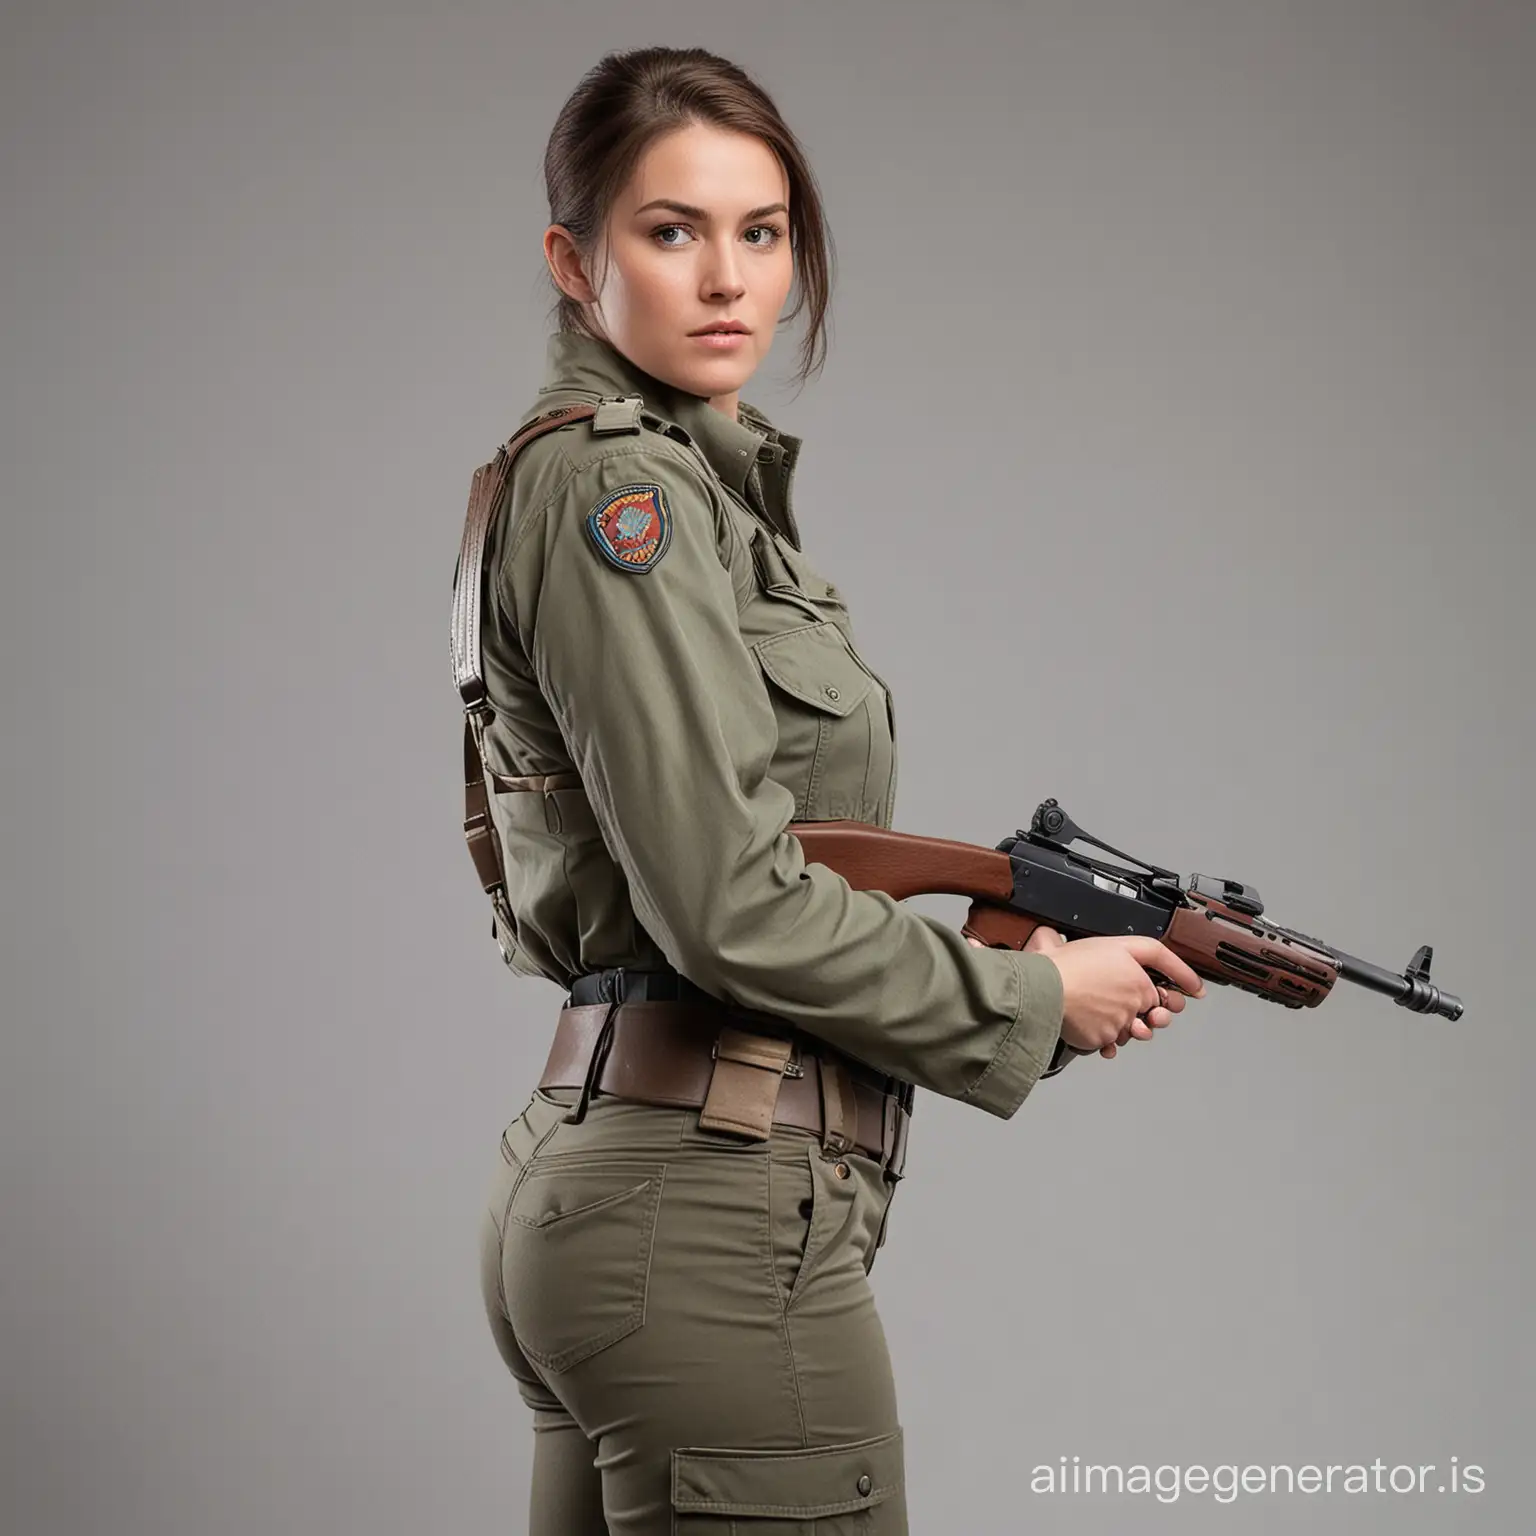 Dynamic-Female-Shooter-in-Action-Pose-with-Rifle